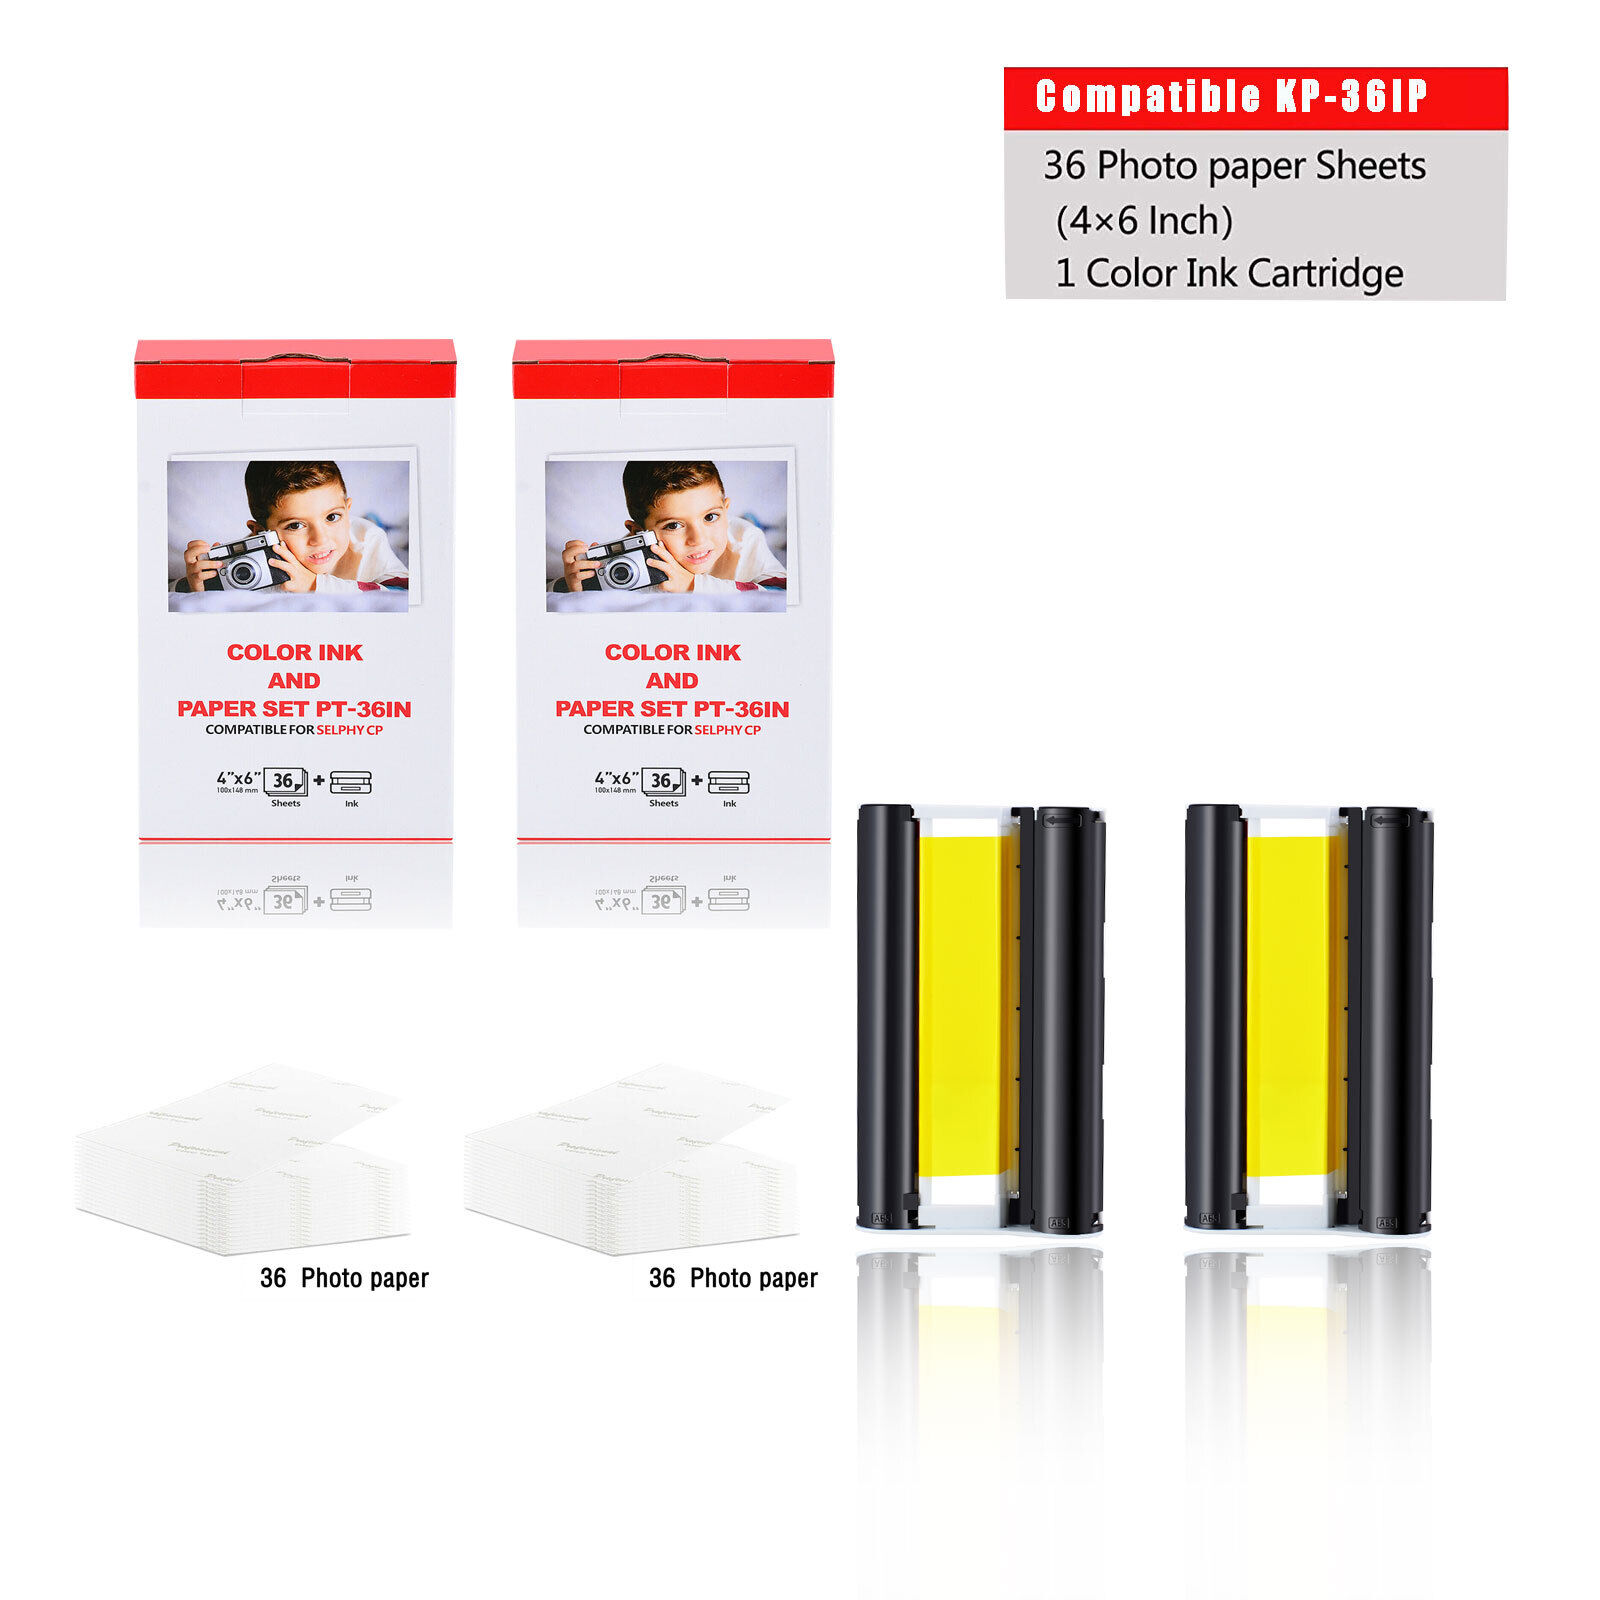 2x Fits Canon KP-36IP Selphy CP-510/600 Color Ink 7737A001 36 4x6 in Photo Paper